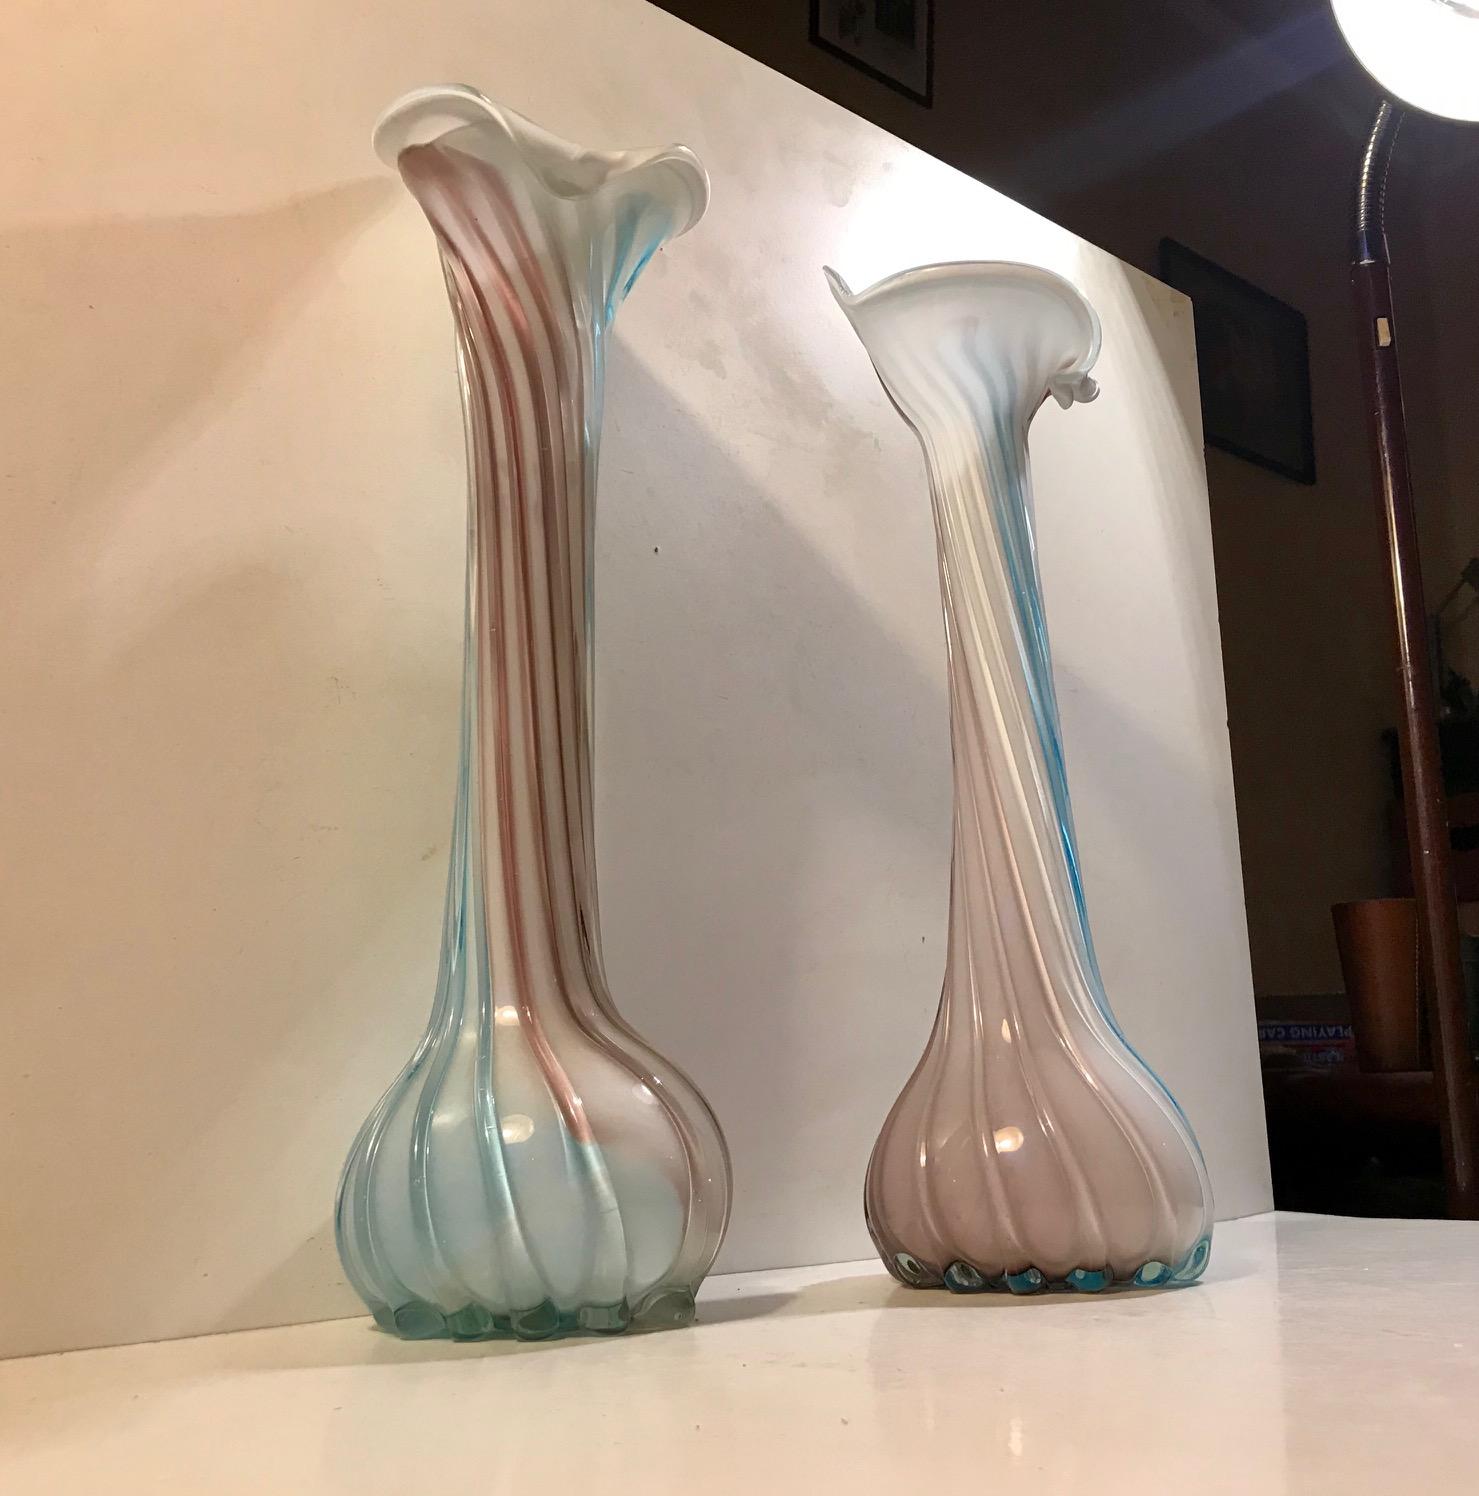 A pair of 'Jack in the Pulpit' vases in cased and twisted Murano glass. Anonymous glass studio/designer in Murano or Venezia circa 1940-1950 in the style of Loetz Rainbow series. The vases are mouth blown and display variances in color composition.